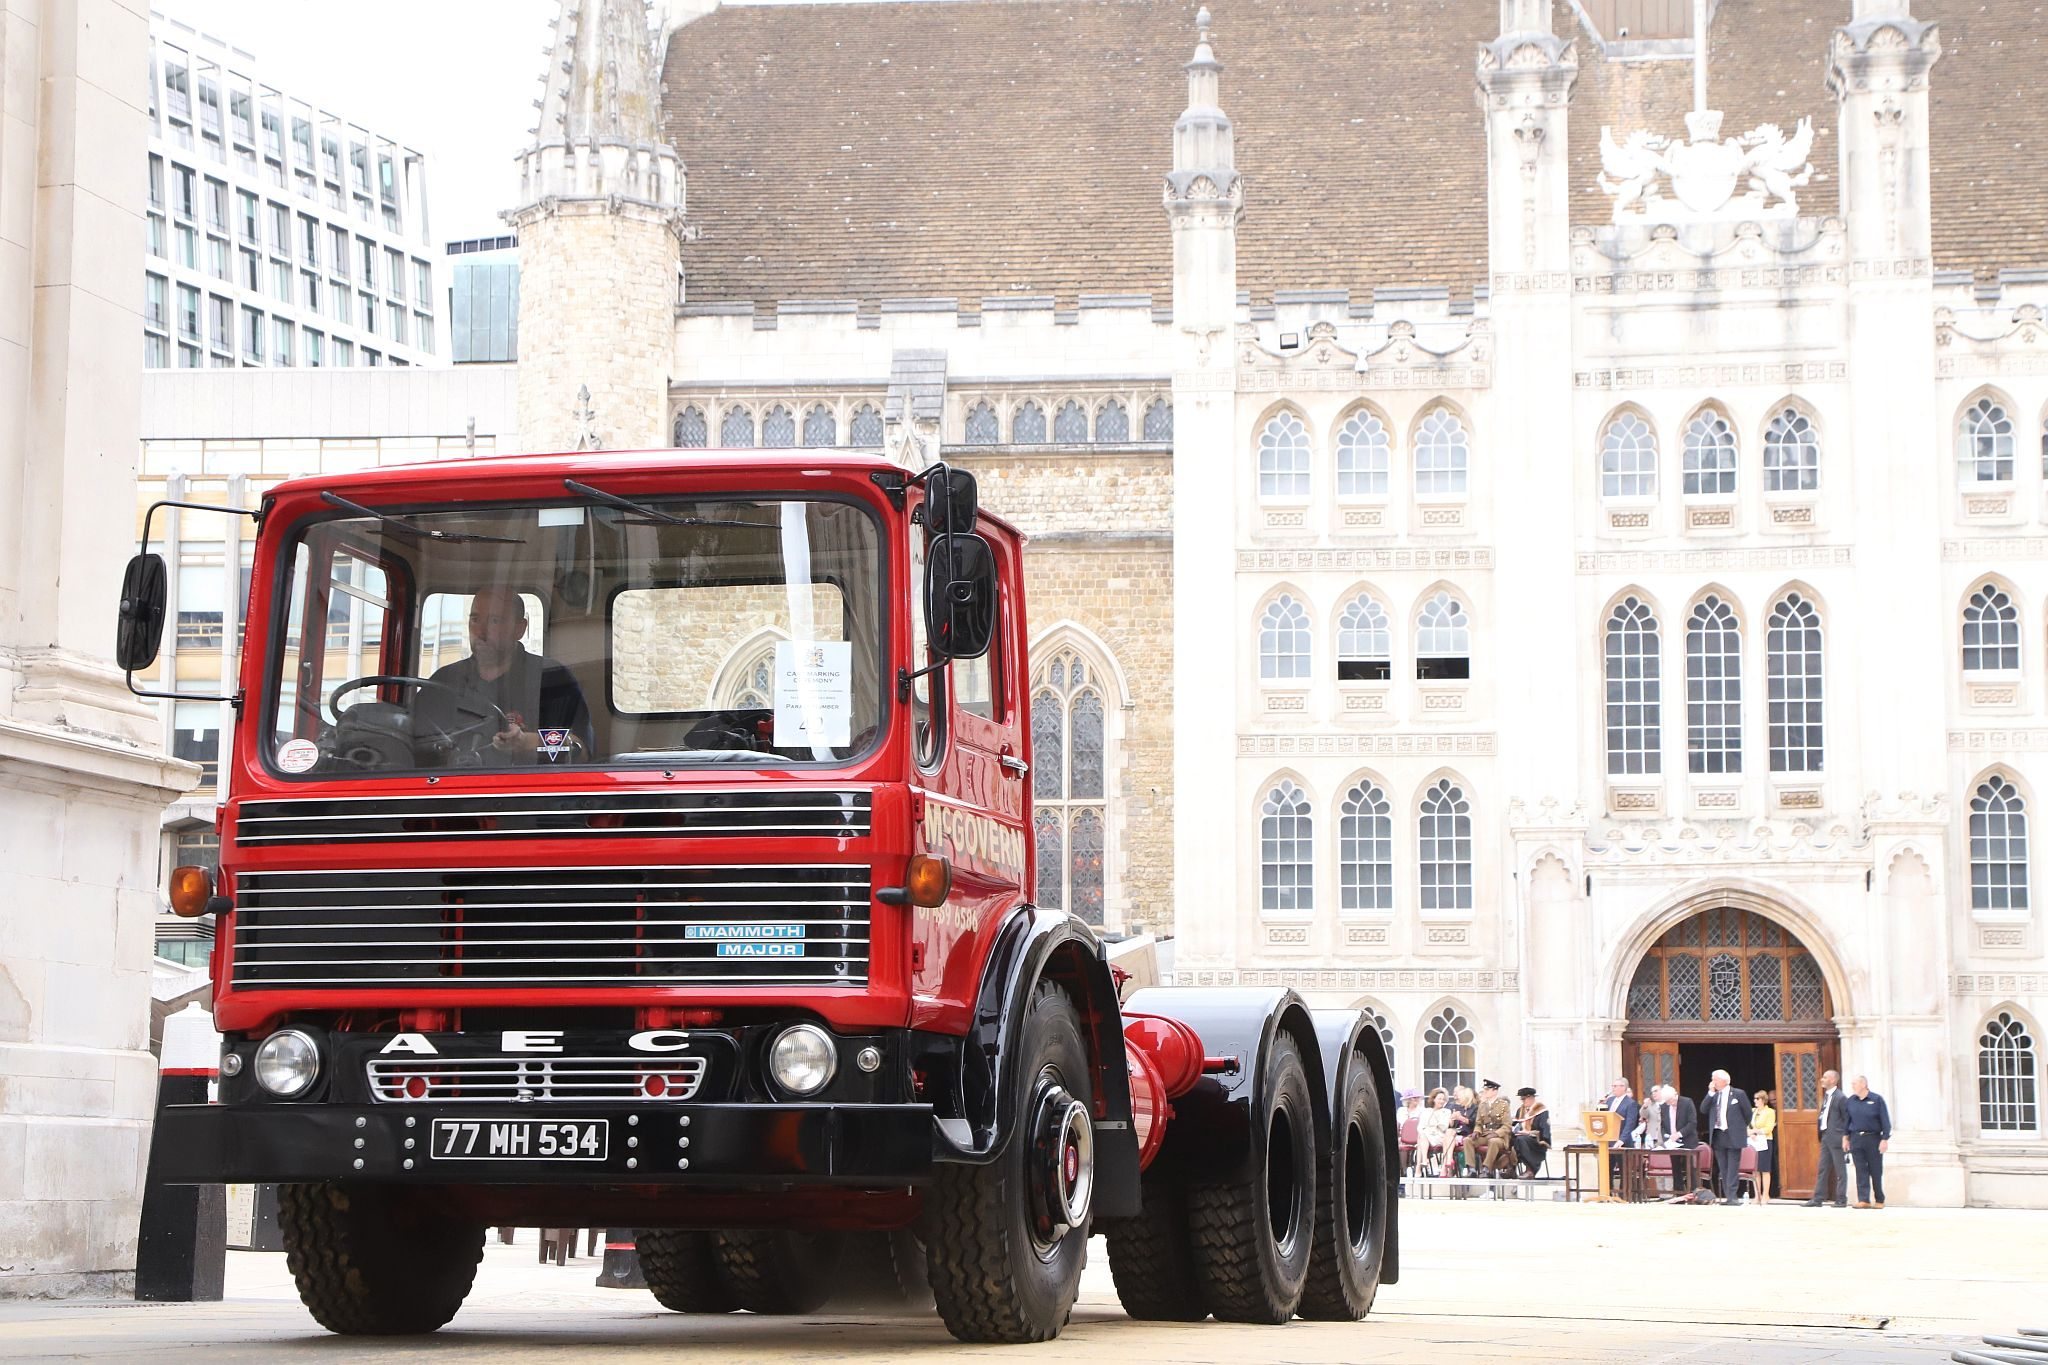 AEC Mammoth Major 1977 77MH534. City of London 2023 Cart Marking in Guildhall Yard on 22-Jul-2023. Hosted by the Worshipful Company of Carmen with the Lord Mayor of the City of London in attendance. Wooden plates on the vehicles are branded with hot irons to allow them to ply for trade in the Square Mile. Another of the City Livery Company's annual ceremonies.